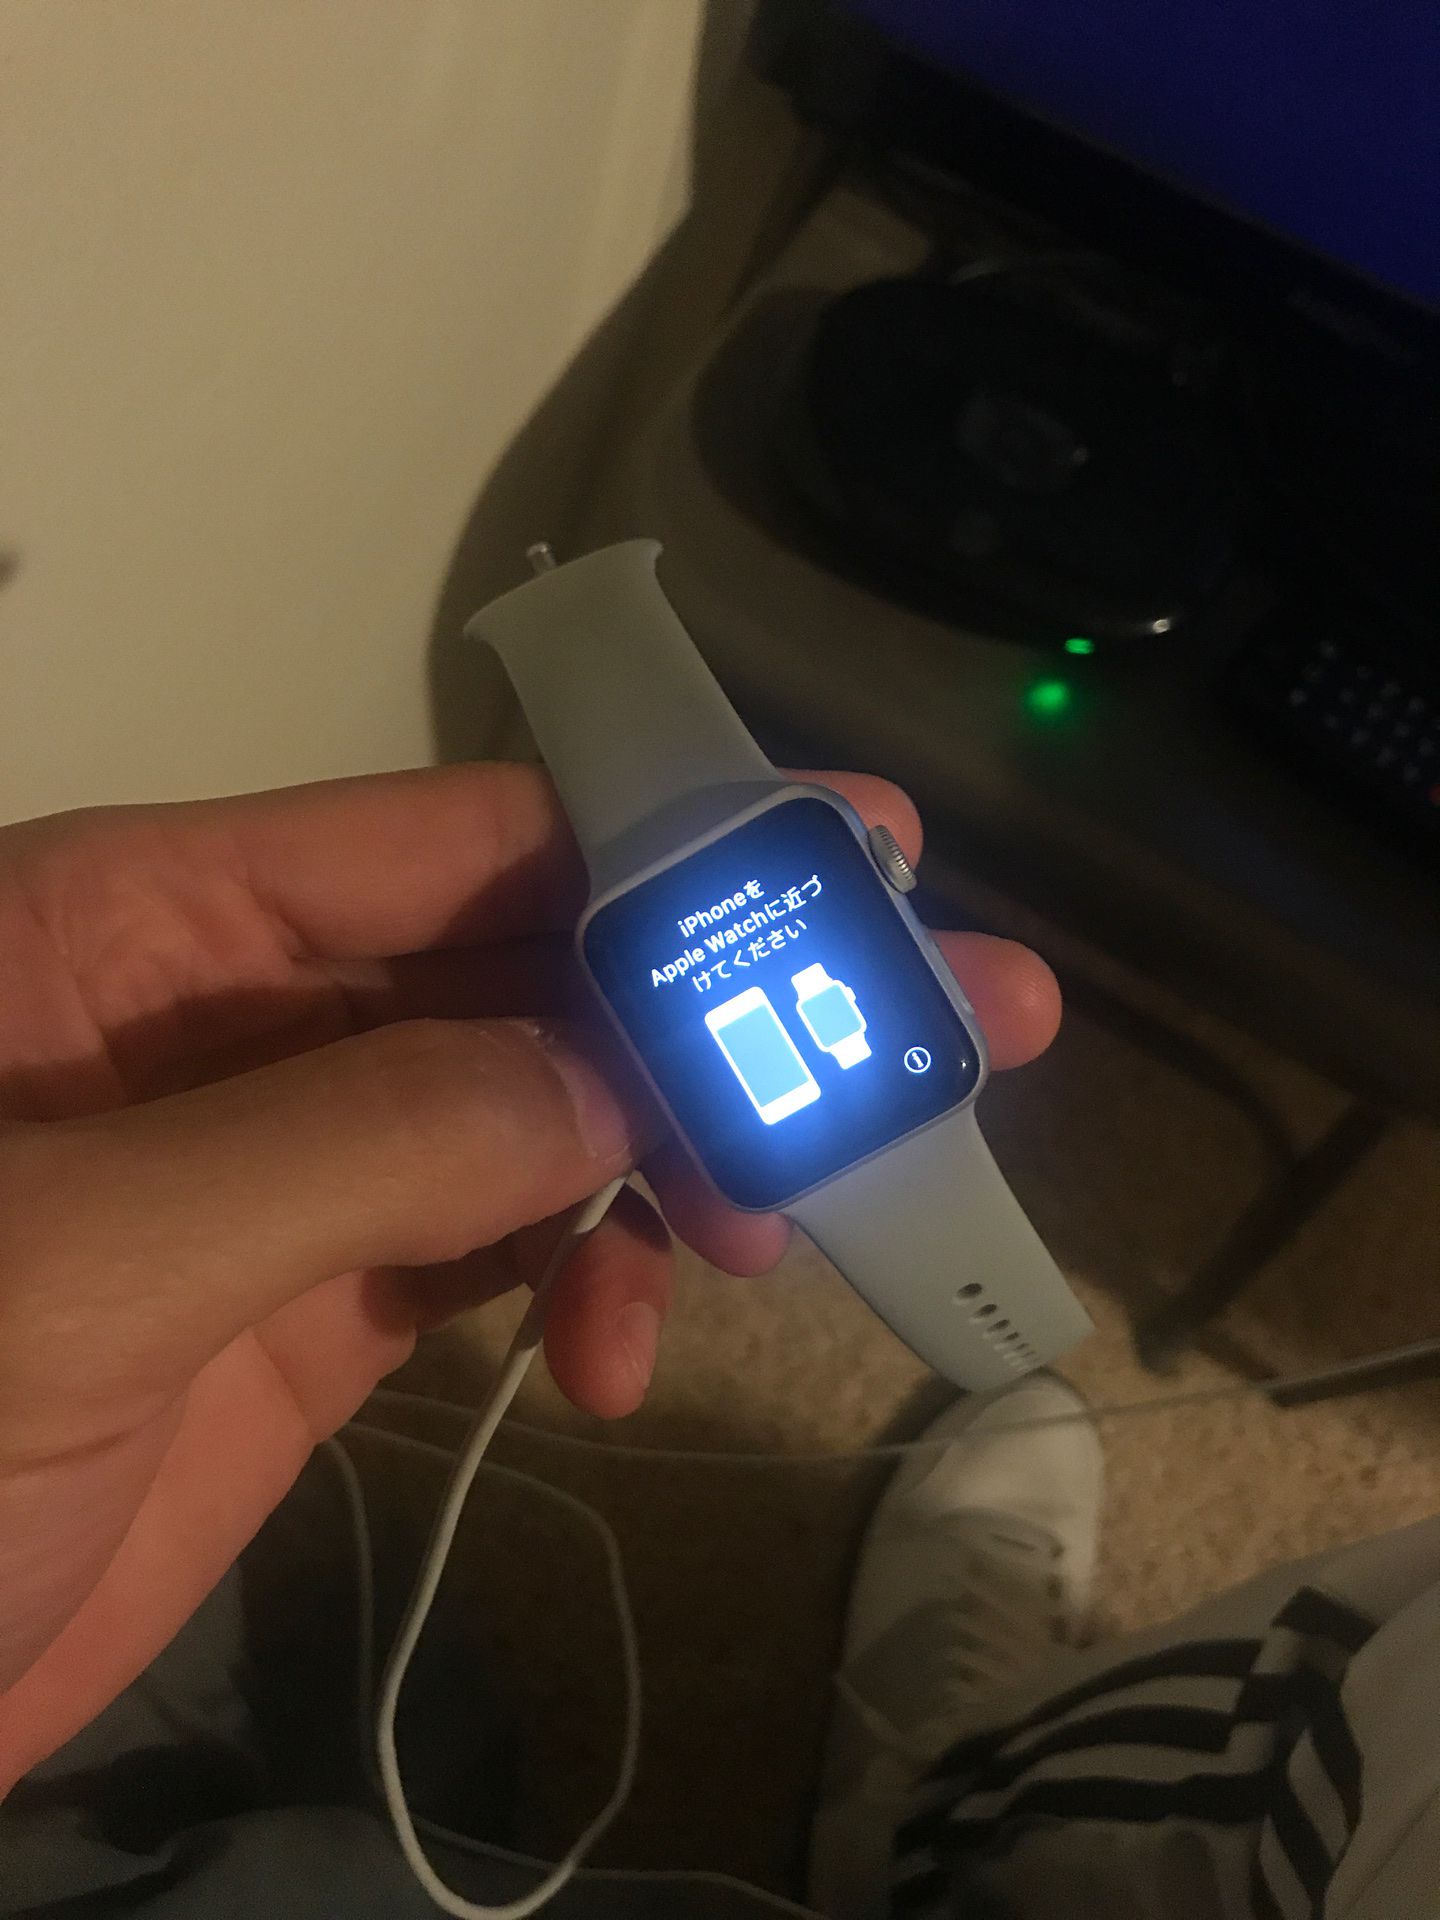 Apple Watch 2 iCloud locked and I’m will trade